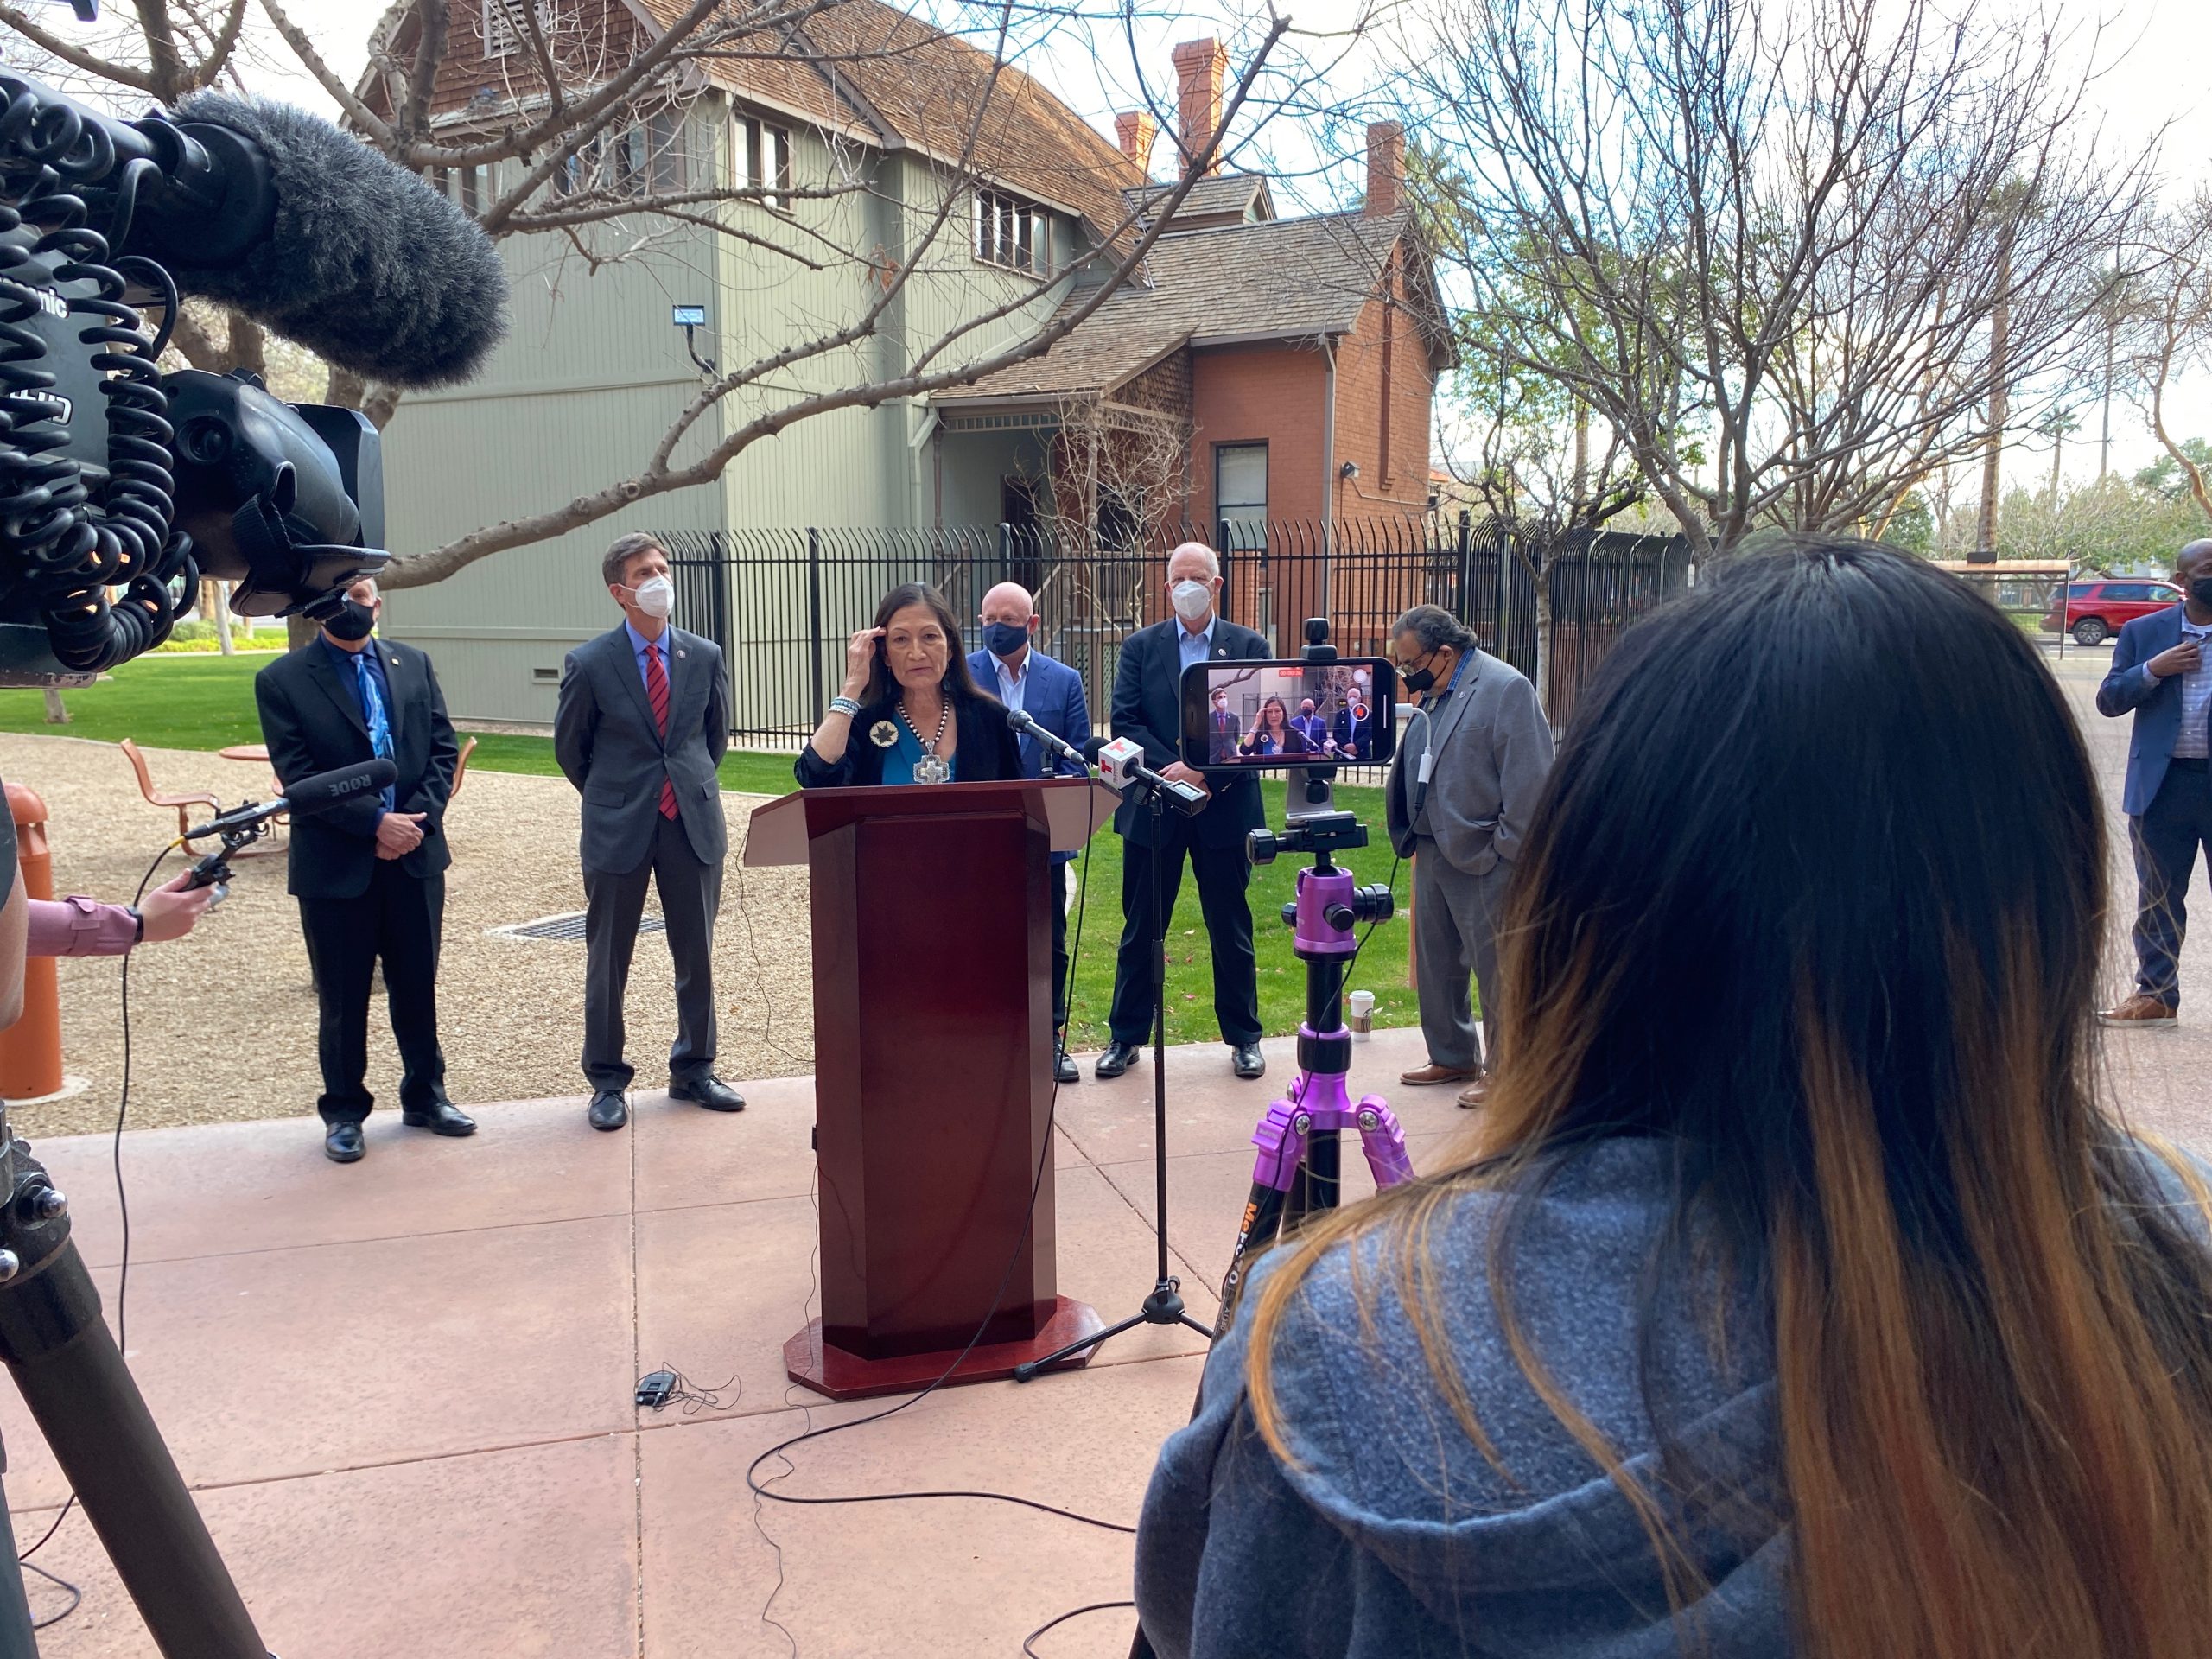 
		A Cronkite student covering a press conference for Indian Country Today		